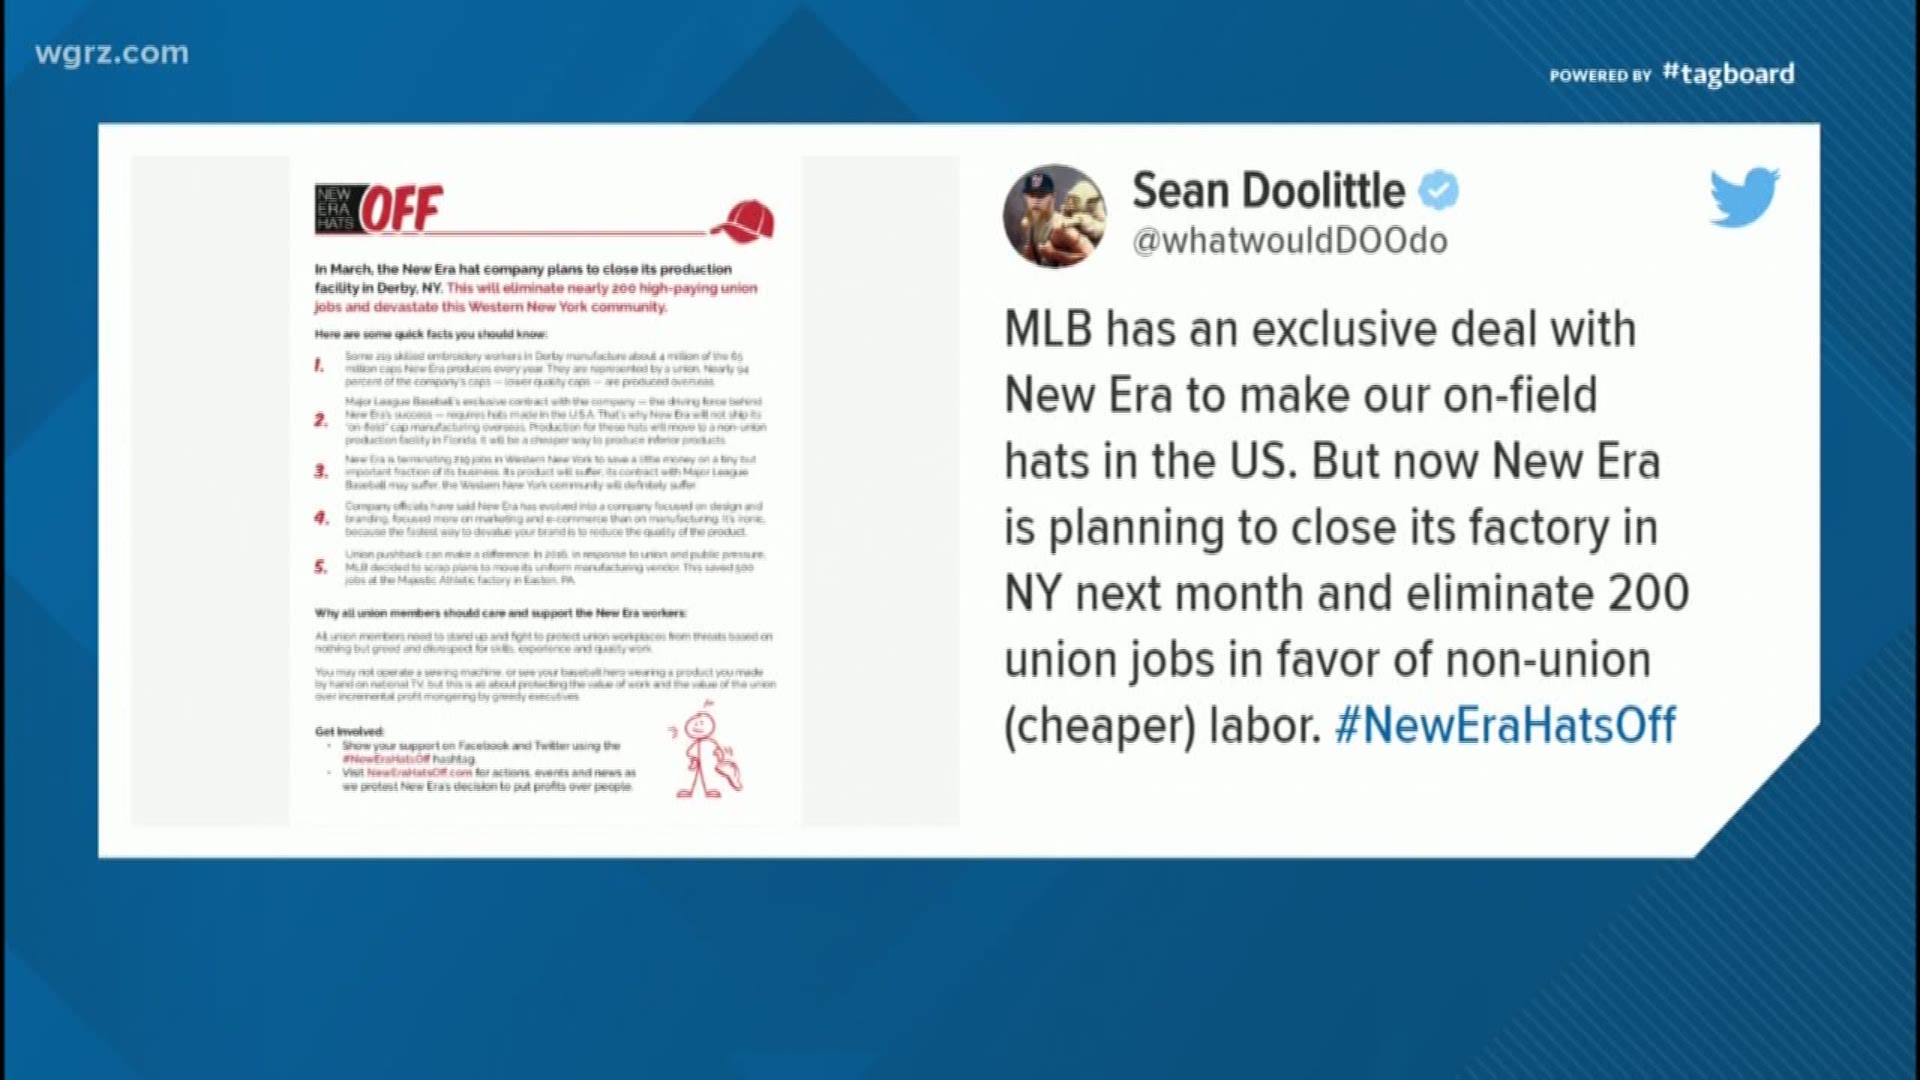 MLB player tweets support of New Era workers